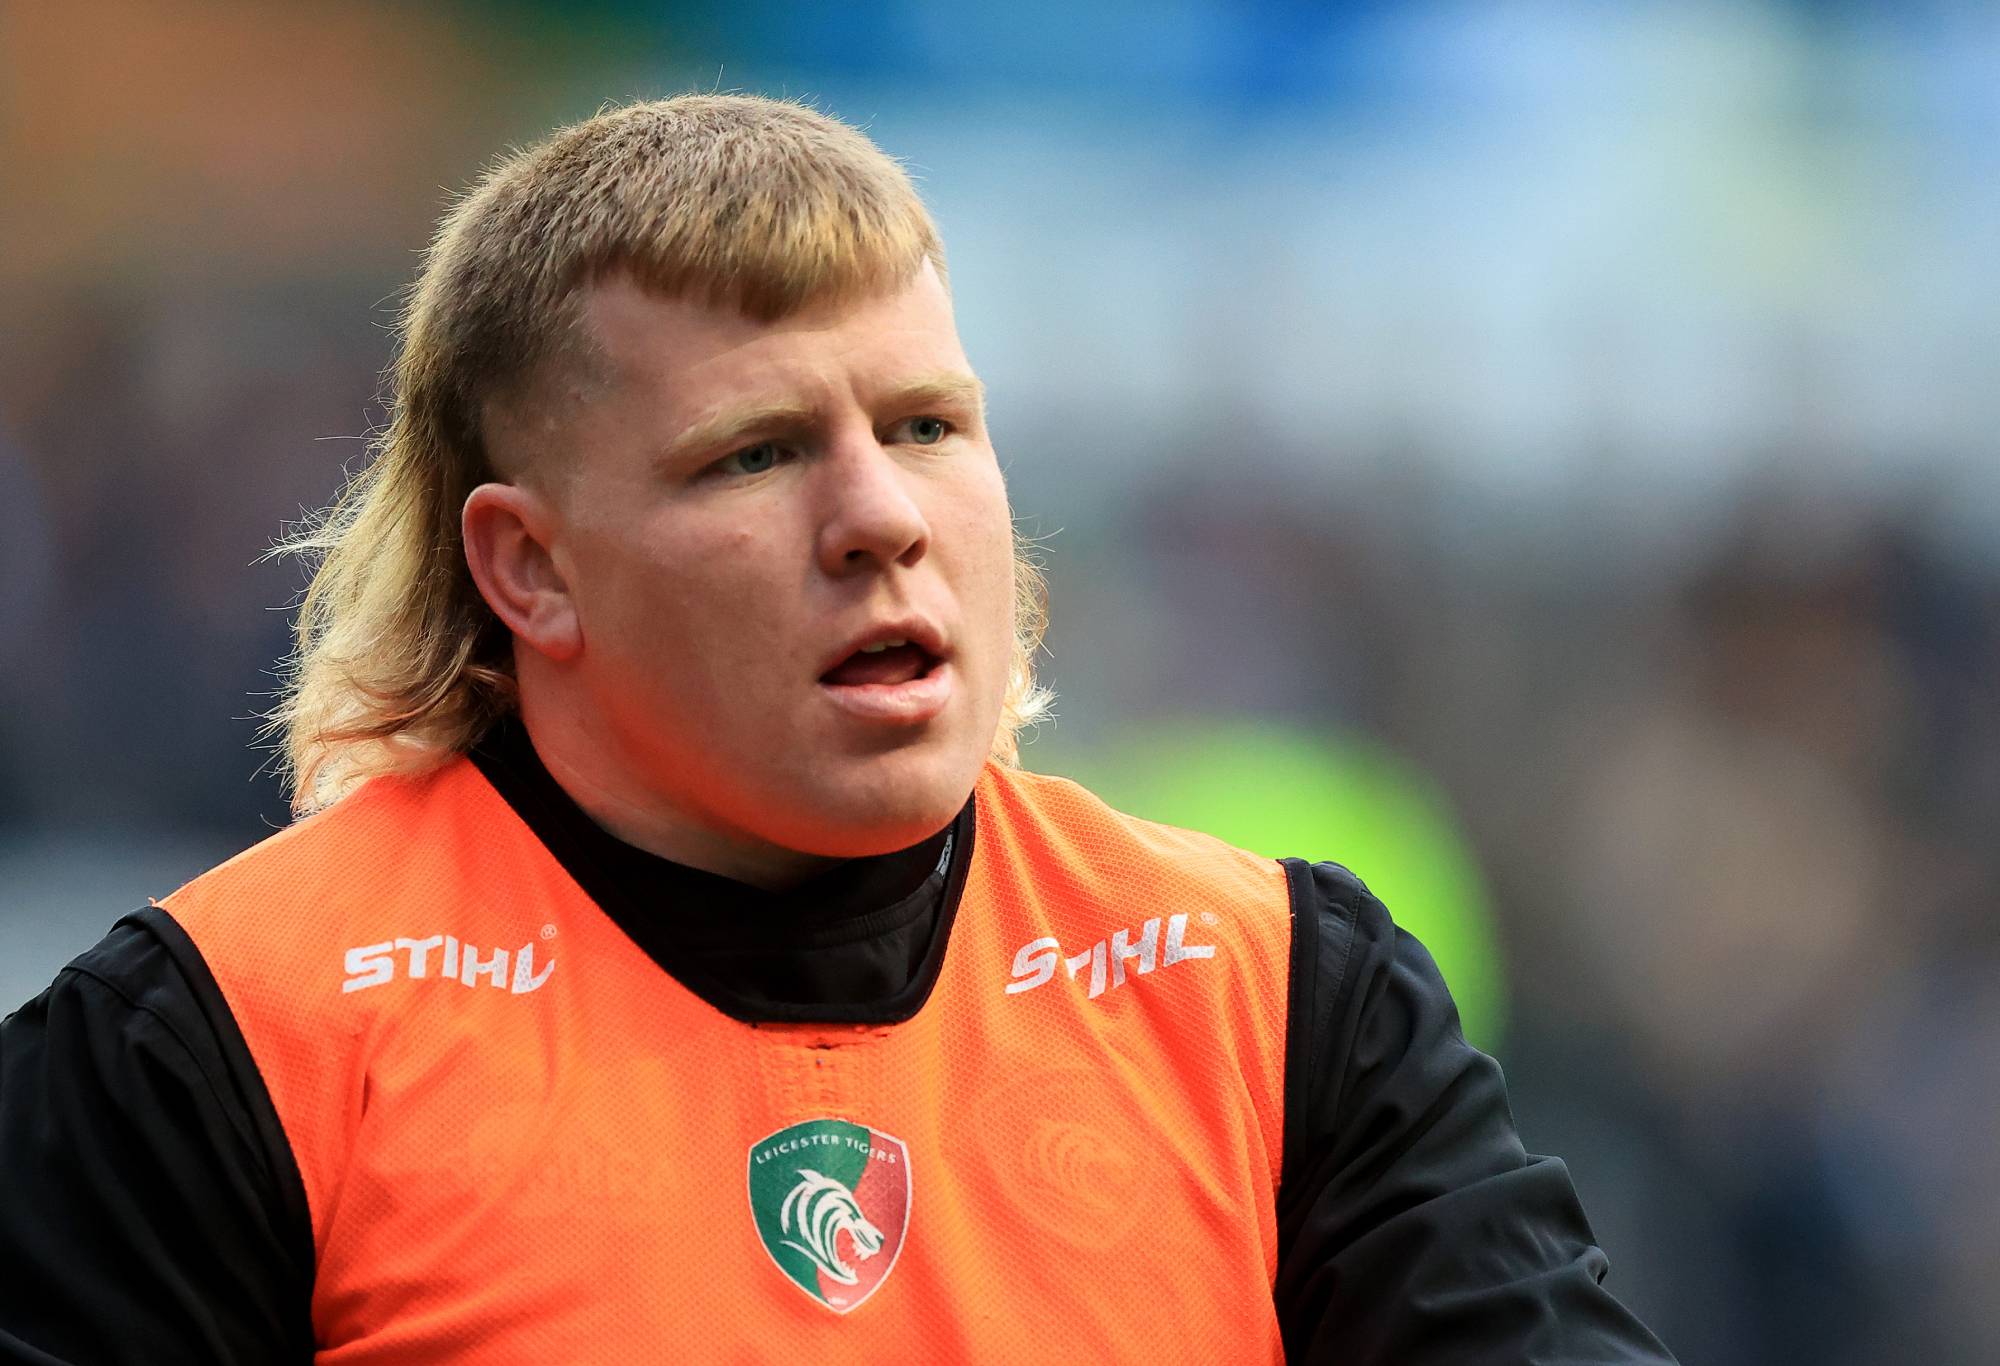 Nic Dolly the Leicester Tigers hooker, looks on in the warm up prior to the Gallagher Premiership Rugby match between Leicester Tigers and Harlequins at Mattioli Woods Welford Road Stadium on December 05, 2021 in Leicester, England. (Photo by David Rogers/Getty Images)